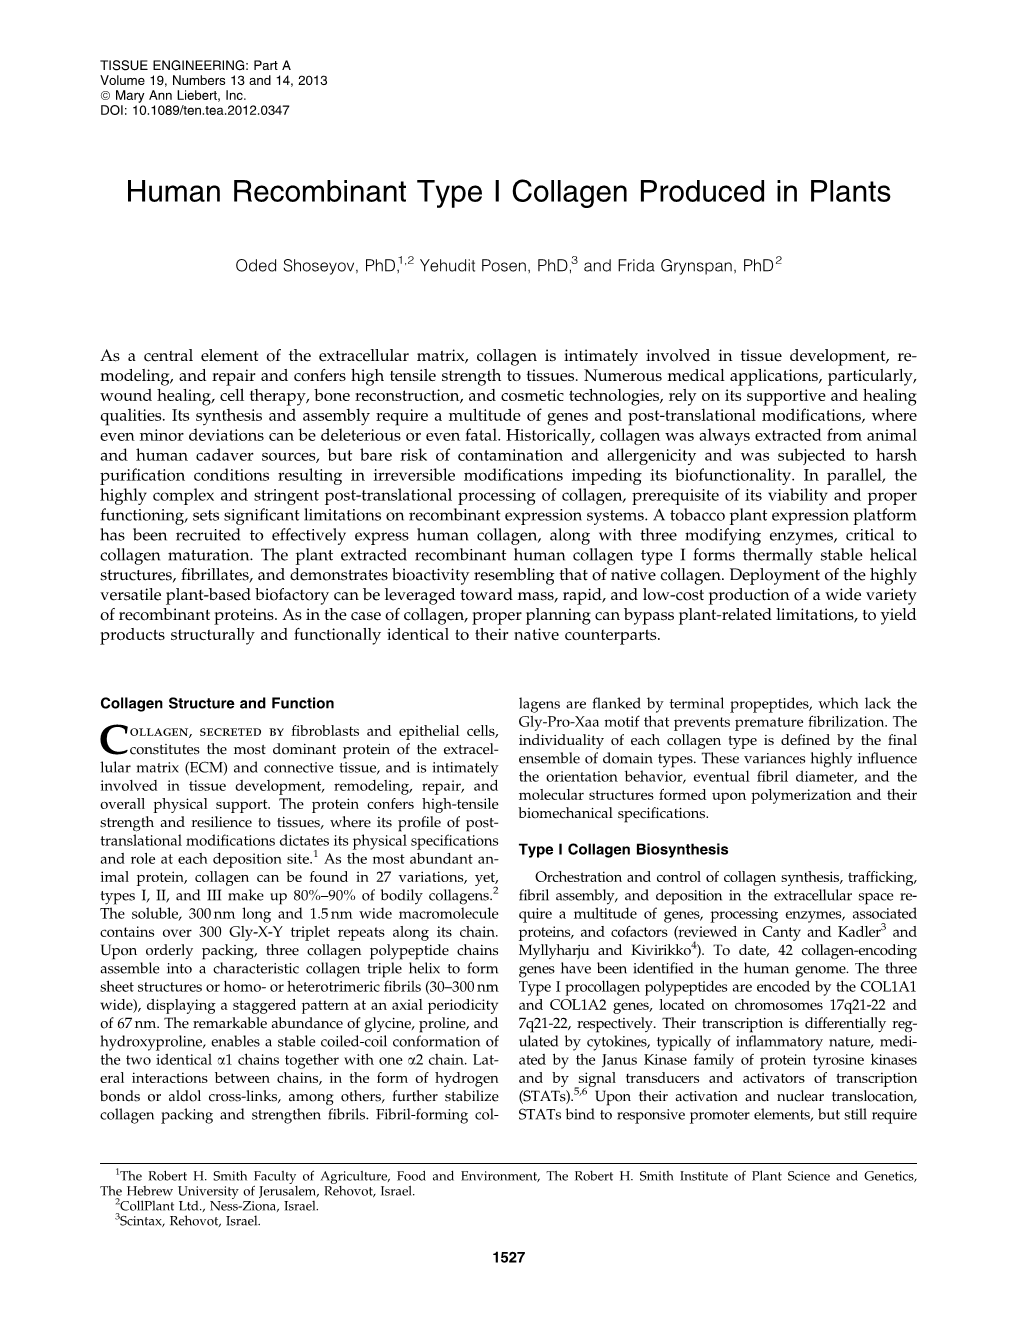 Human Recombinant Type I Collagen Produced in Plants